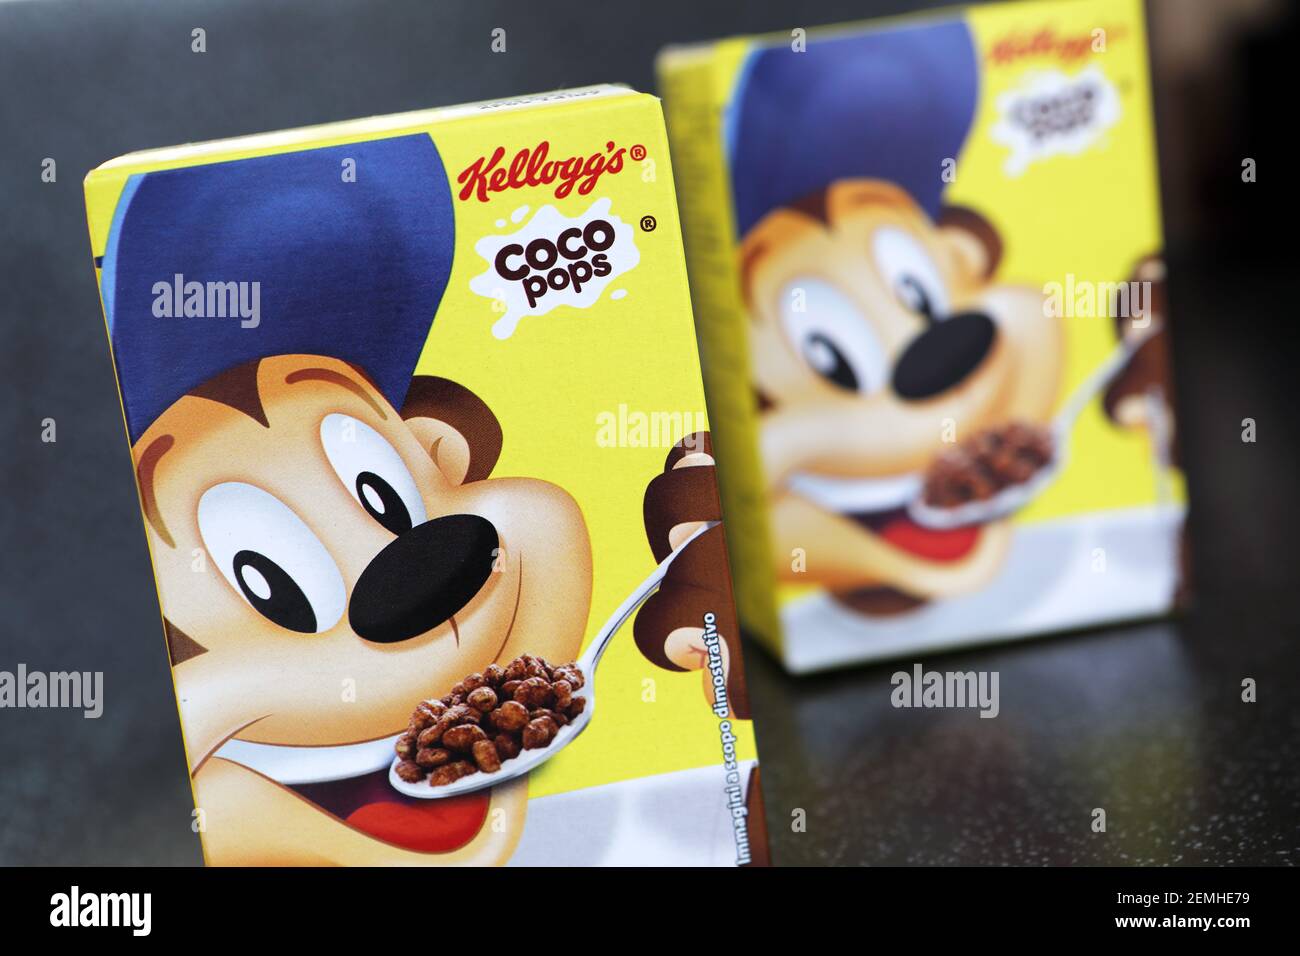 Kellogg's Coco pops breakfast cereal one serving boxes Stock Photo